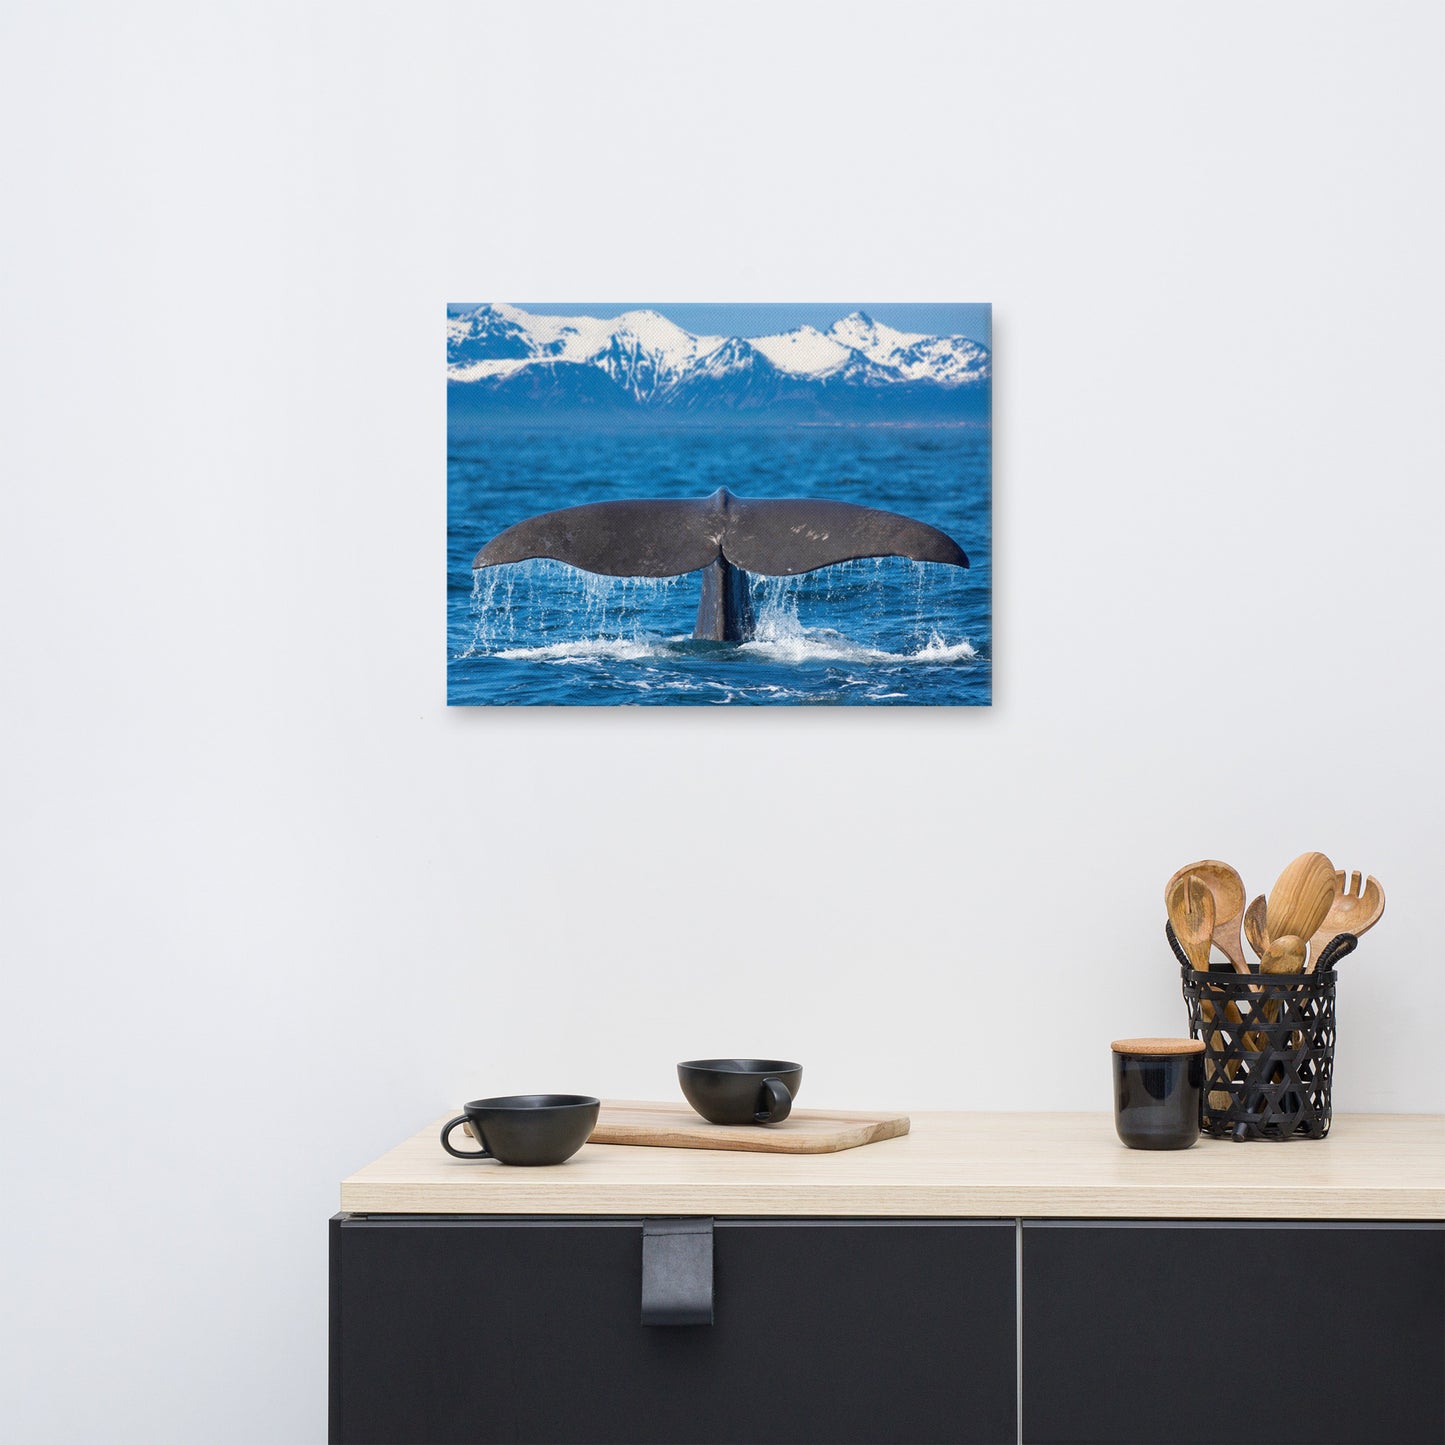 Sperm Whale Tall Splashing In Blue Water With Mountains Of Norway Animal Wildlife Photograph Canvas Wall Art Print